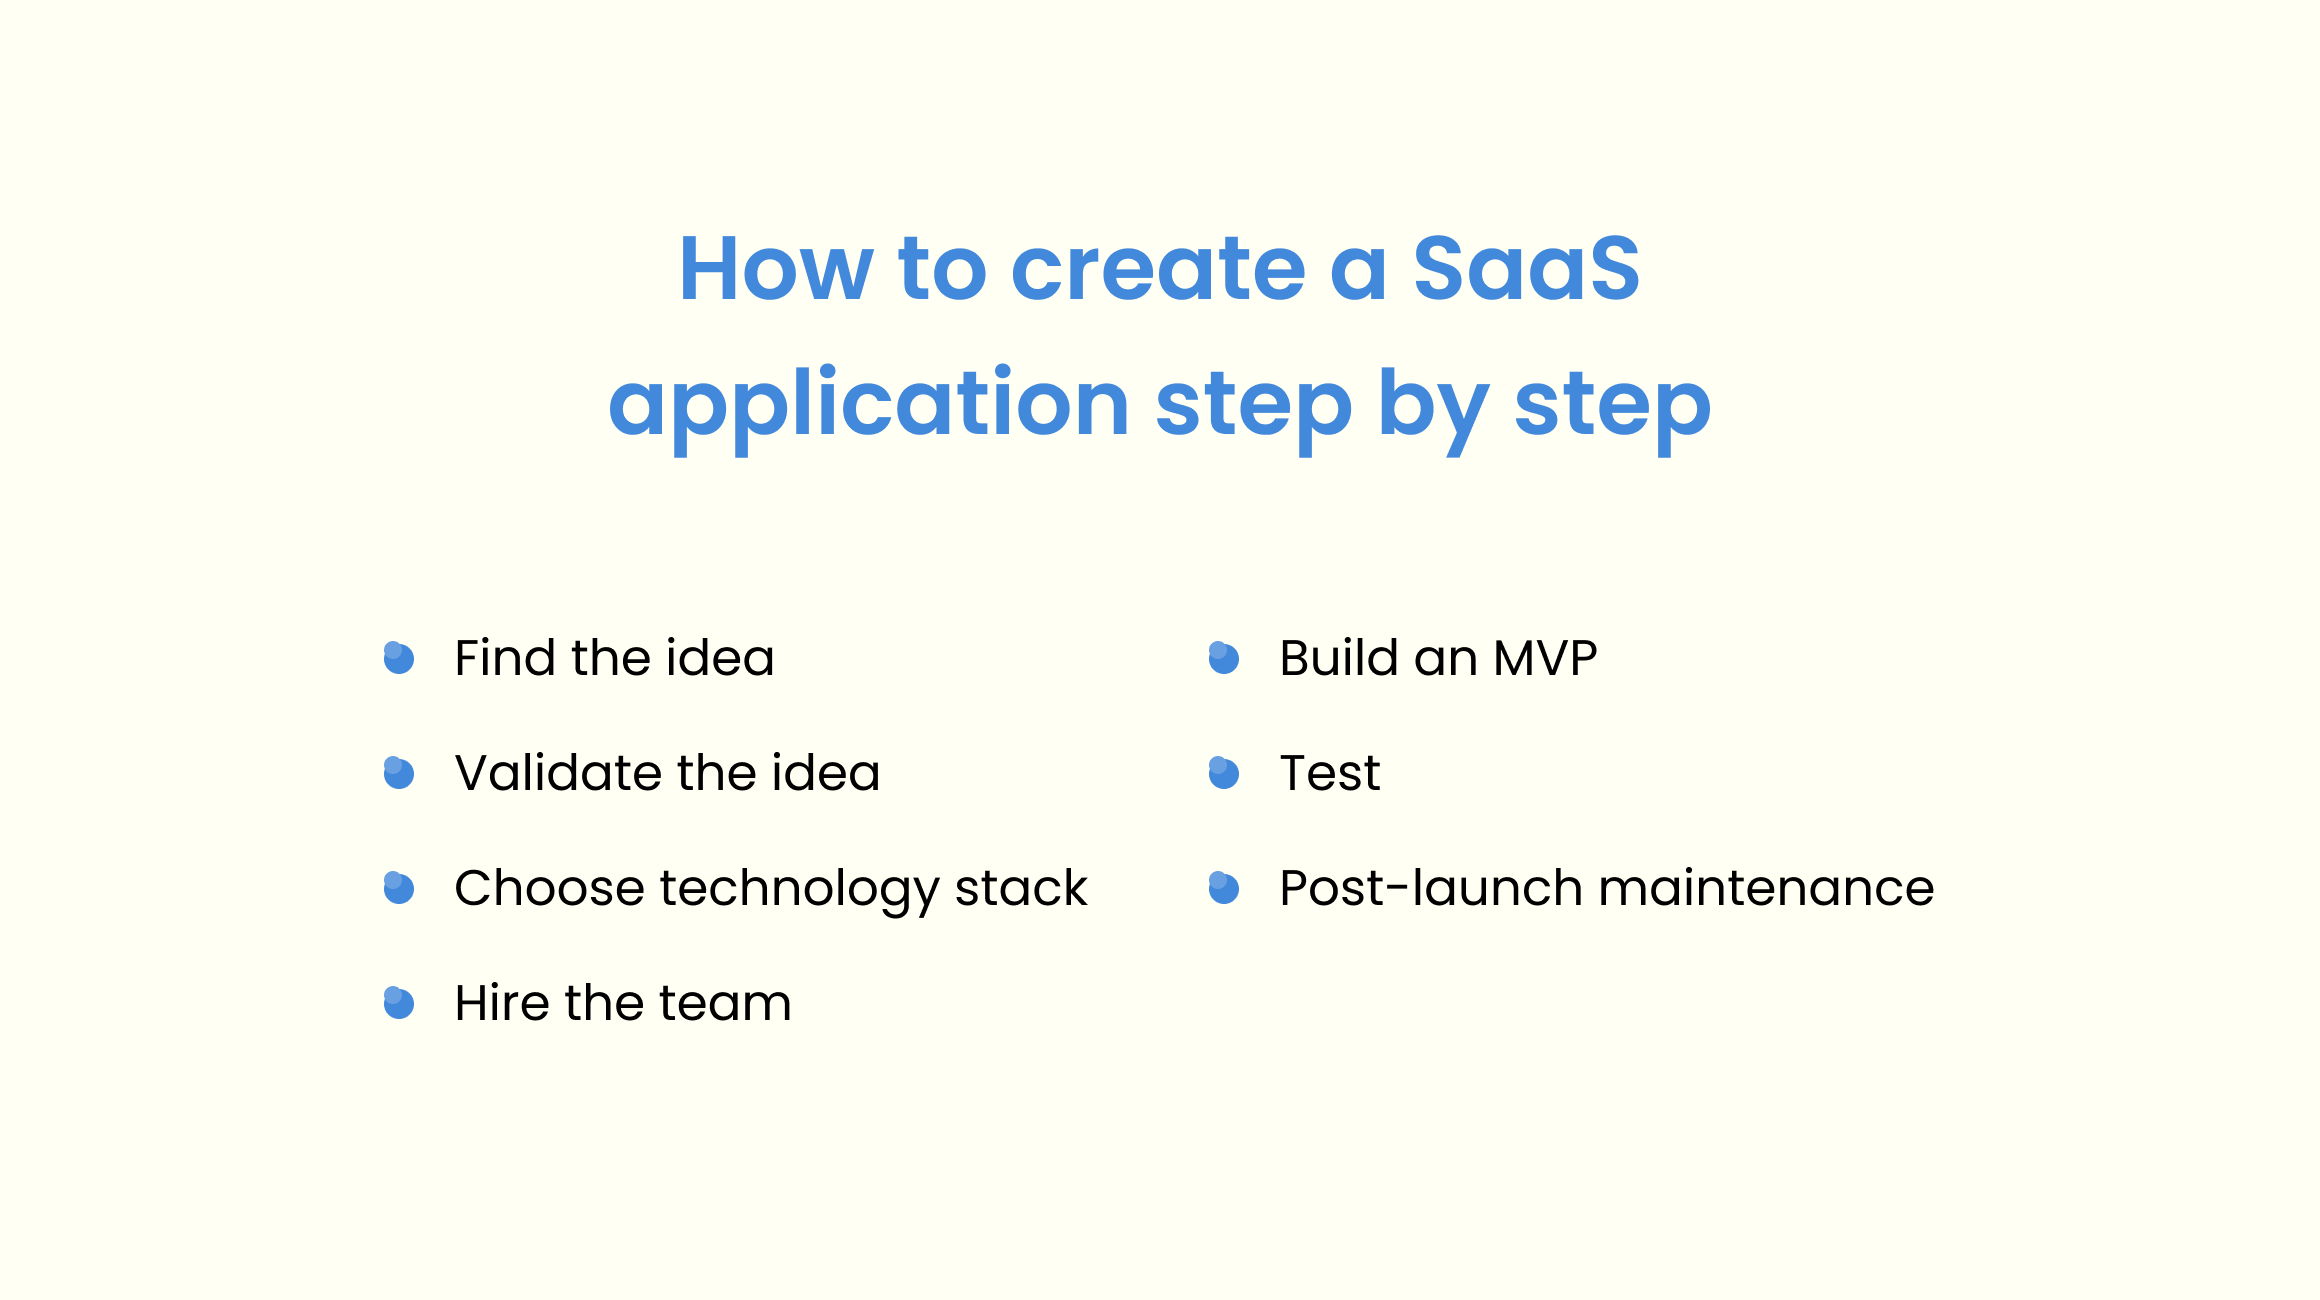 How to create a SaaS application